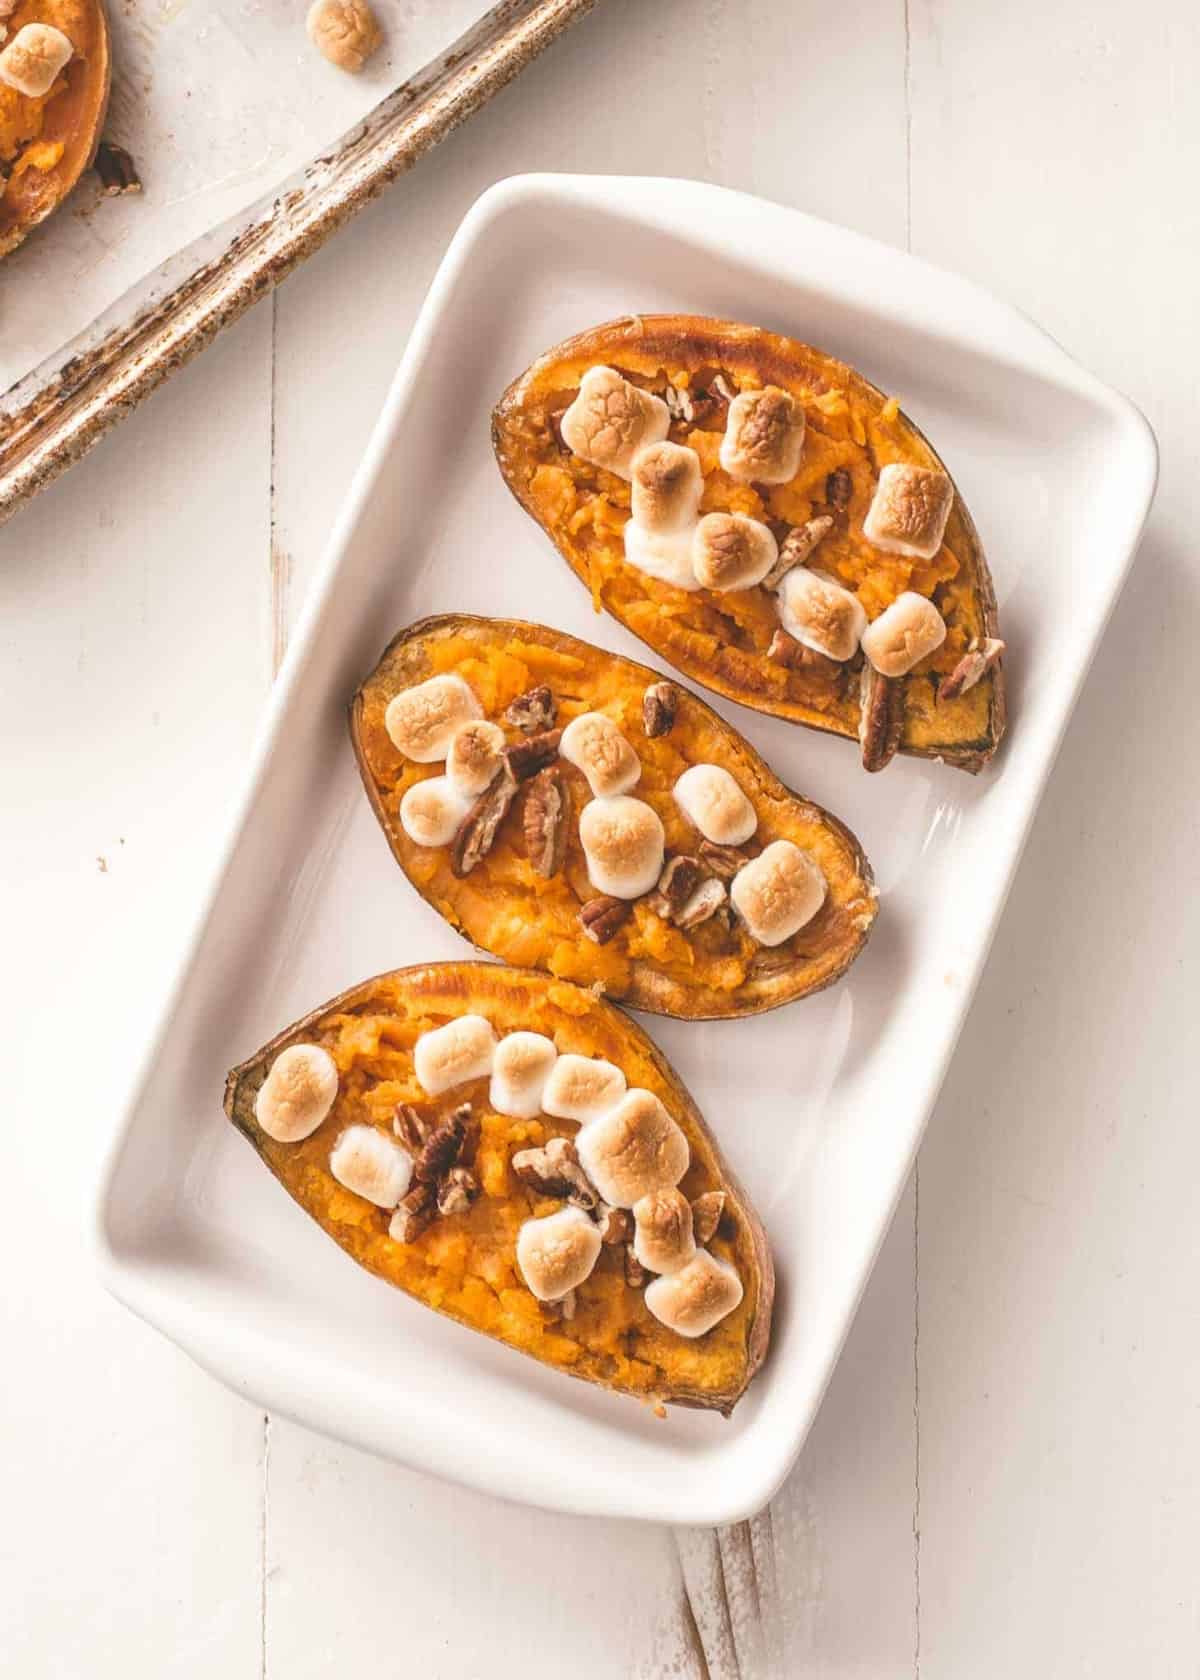 twice baked sweet potatoes in a white baking dish